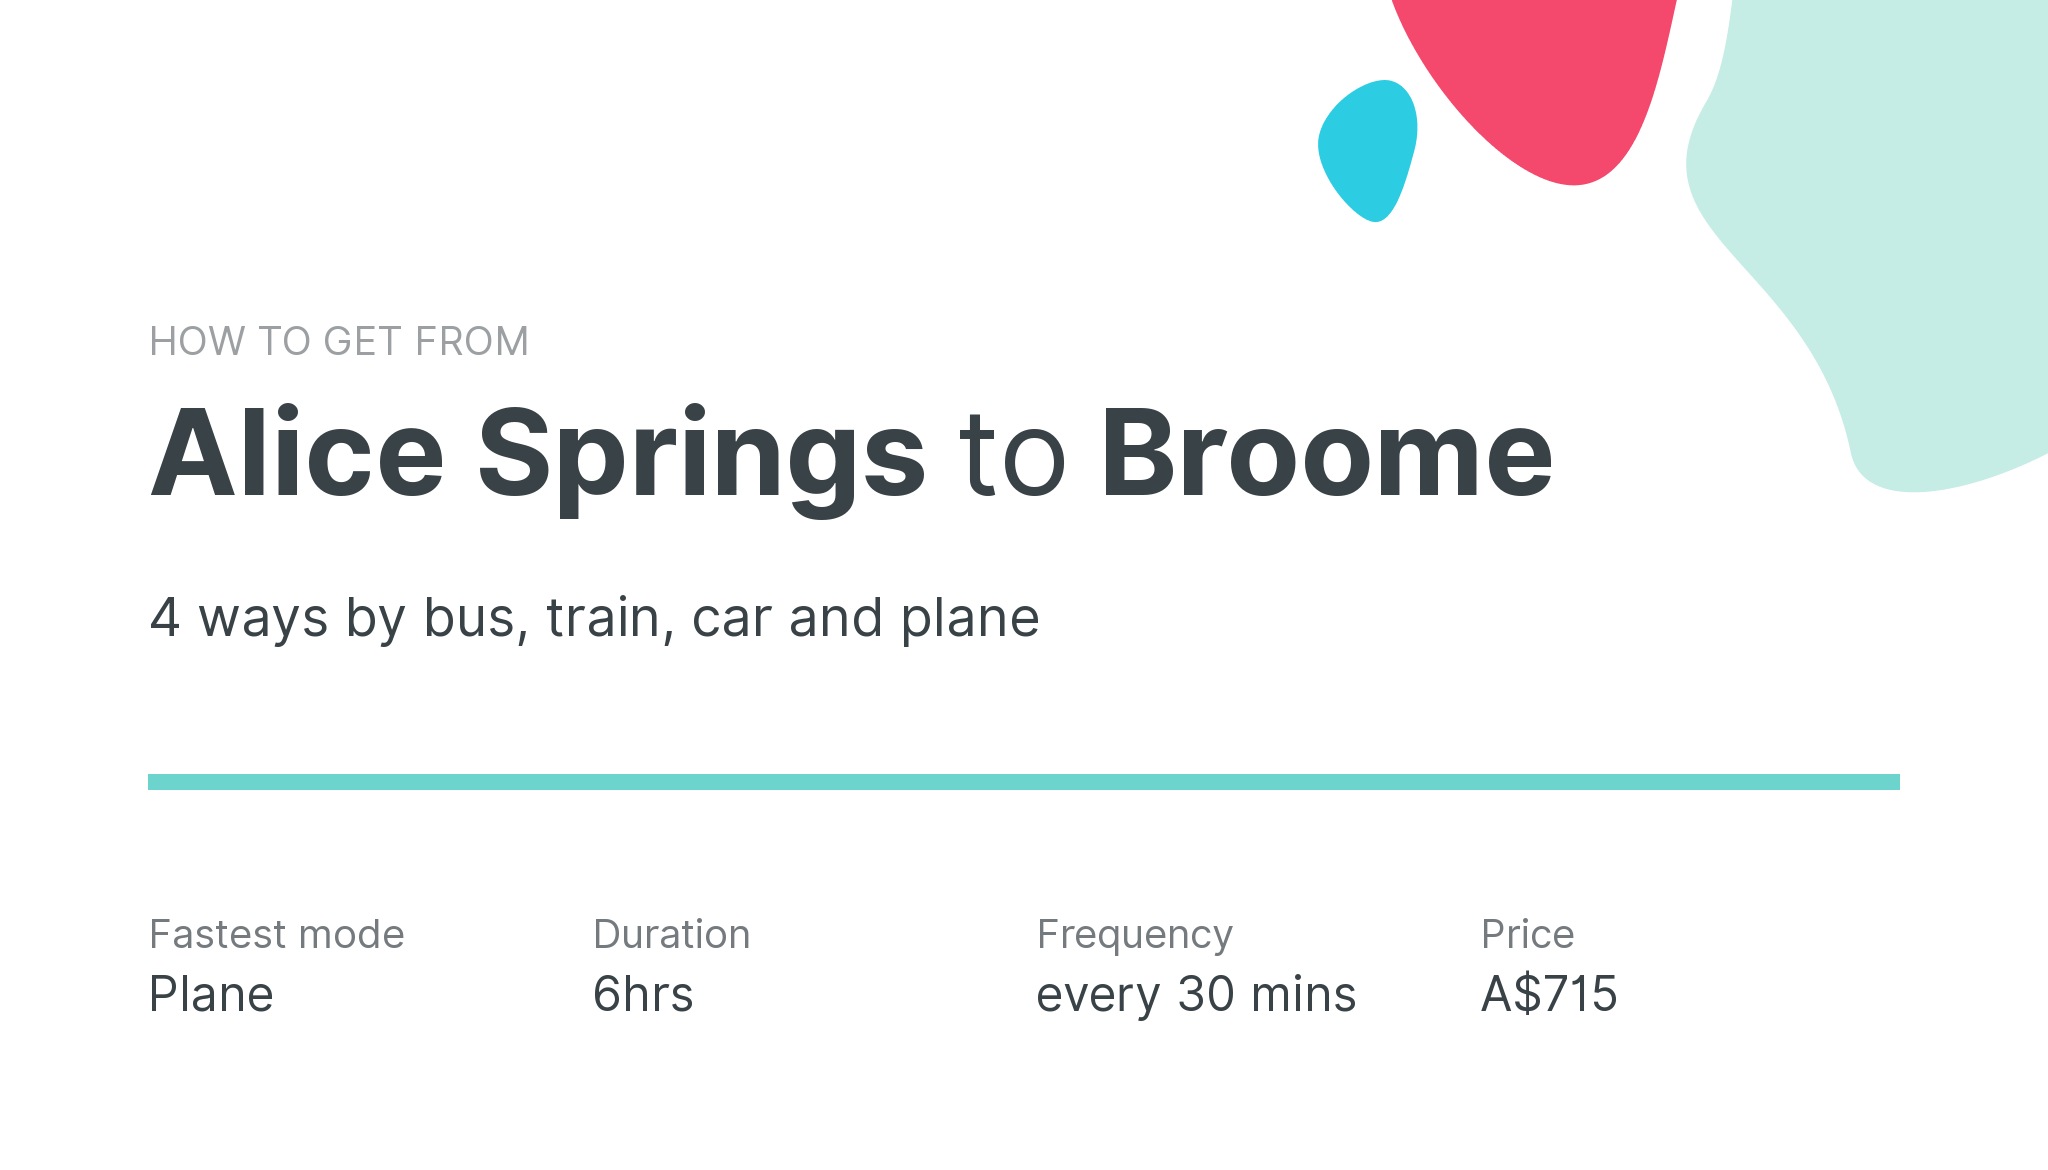 How do I get from Alice Springs to Broome